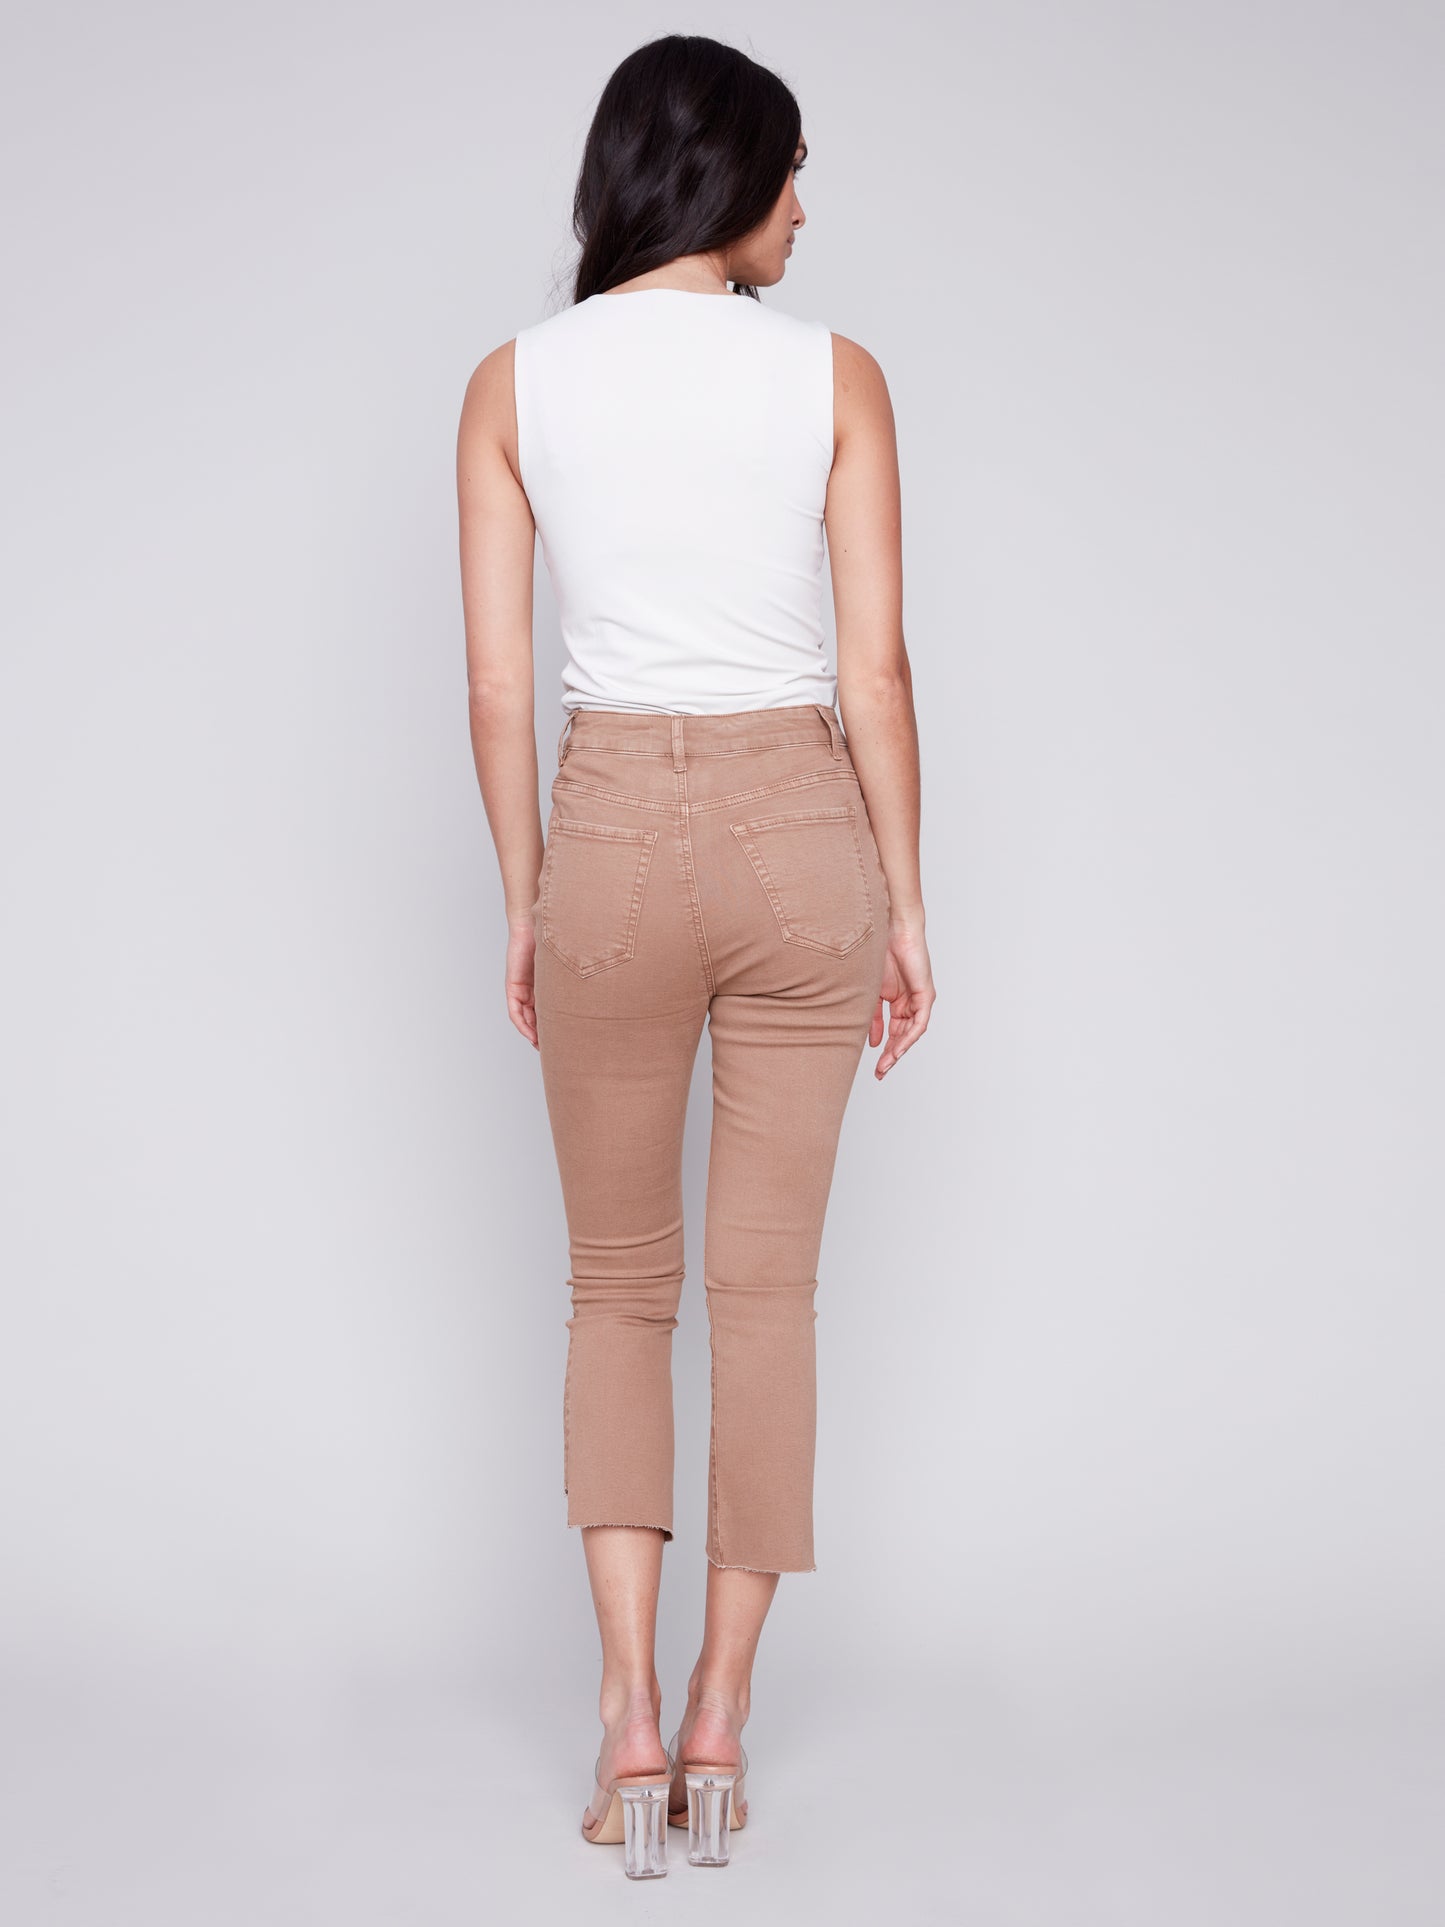 Caramel Pant with Raw Edge By Charlie B